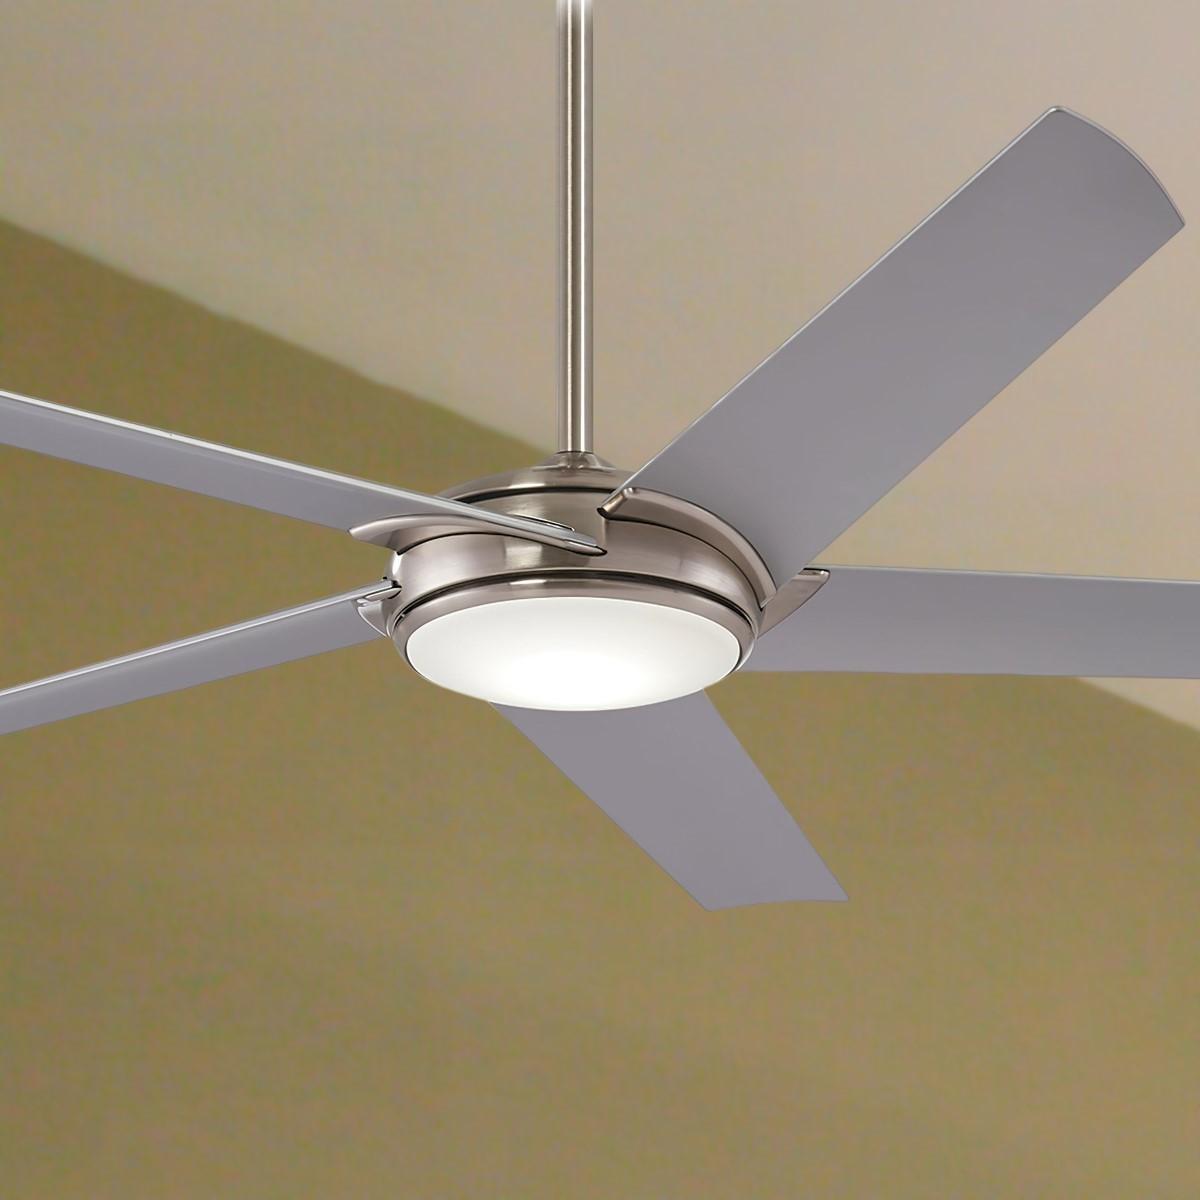 Raptor 60 Inch Contemporary Ceiling Fan With Light And Remote